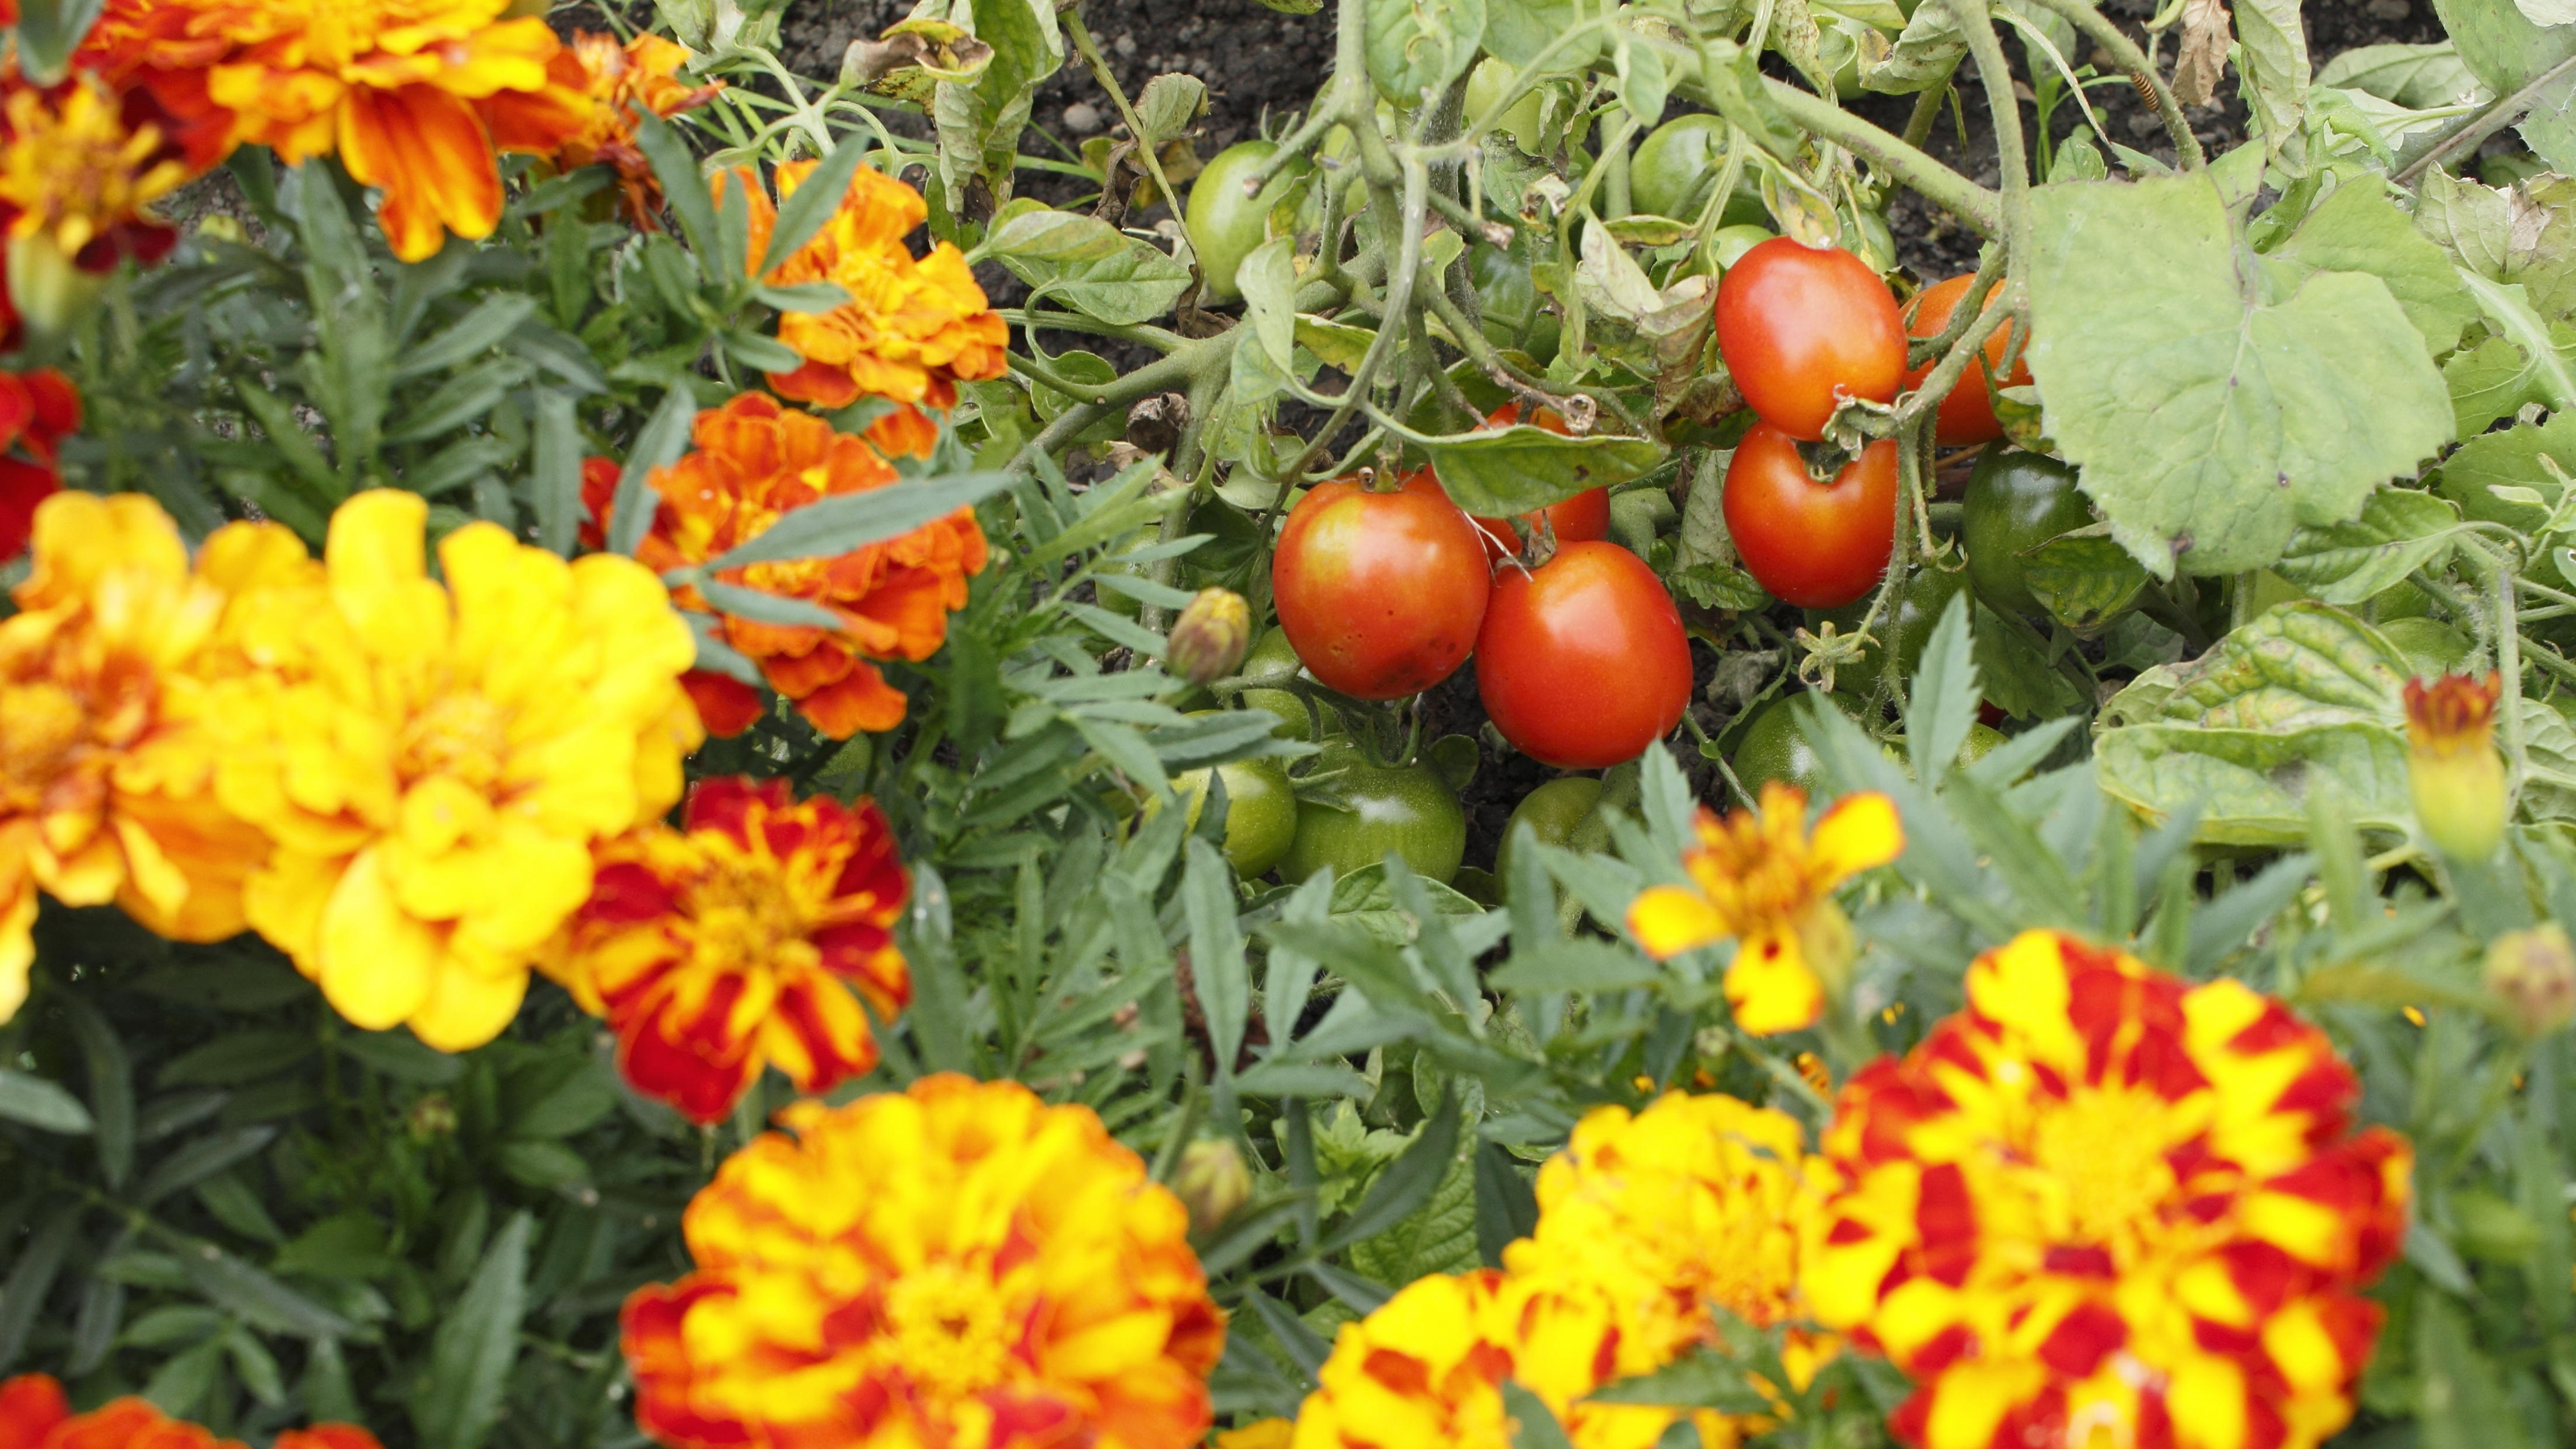 Image of Marigolds and tomatoes companion planting to deter pests